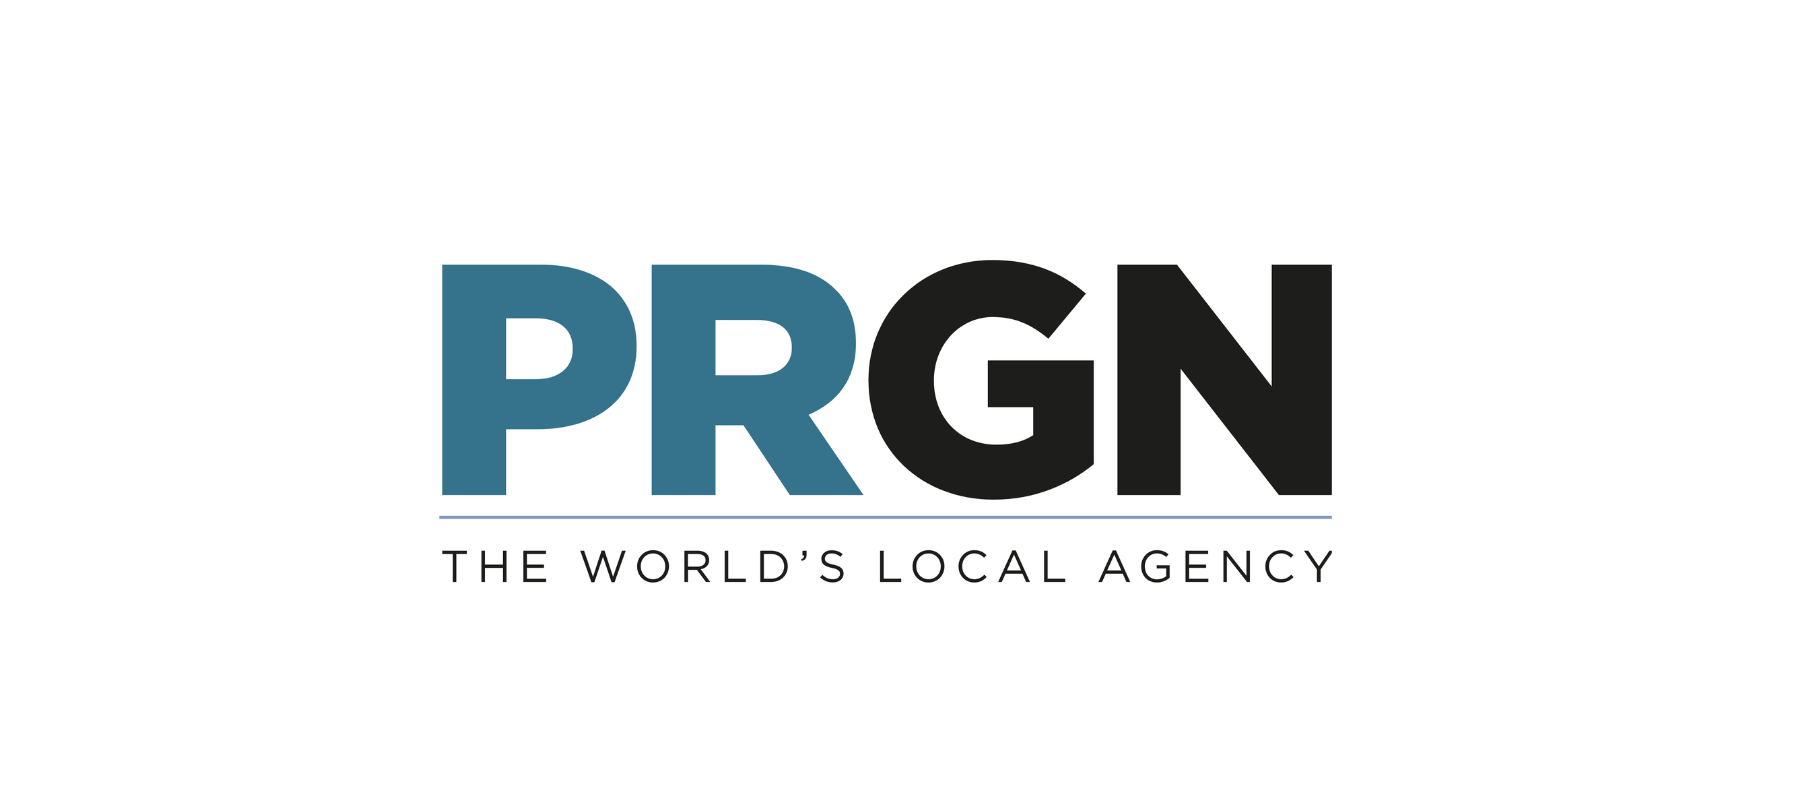 PR Global Network expands to Sweden, boosts African brand presence in Nordics